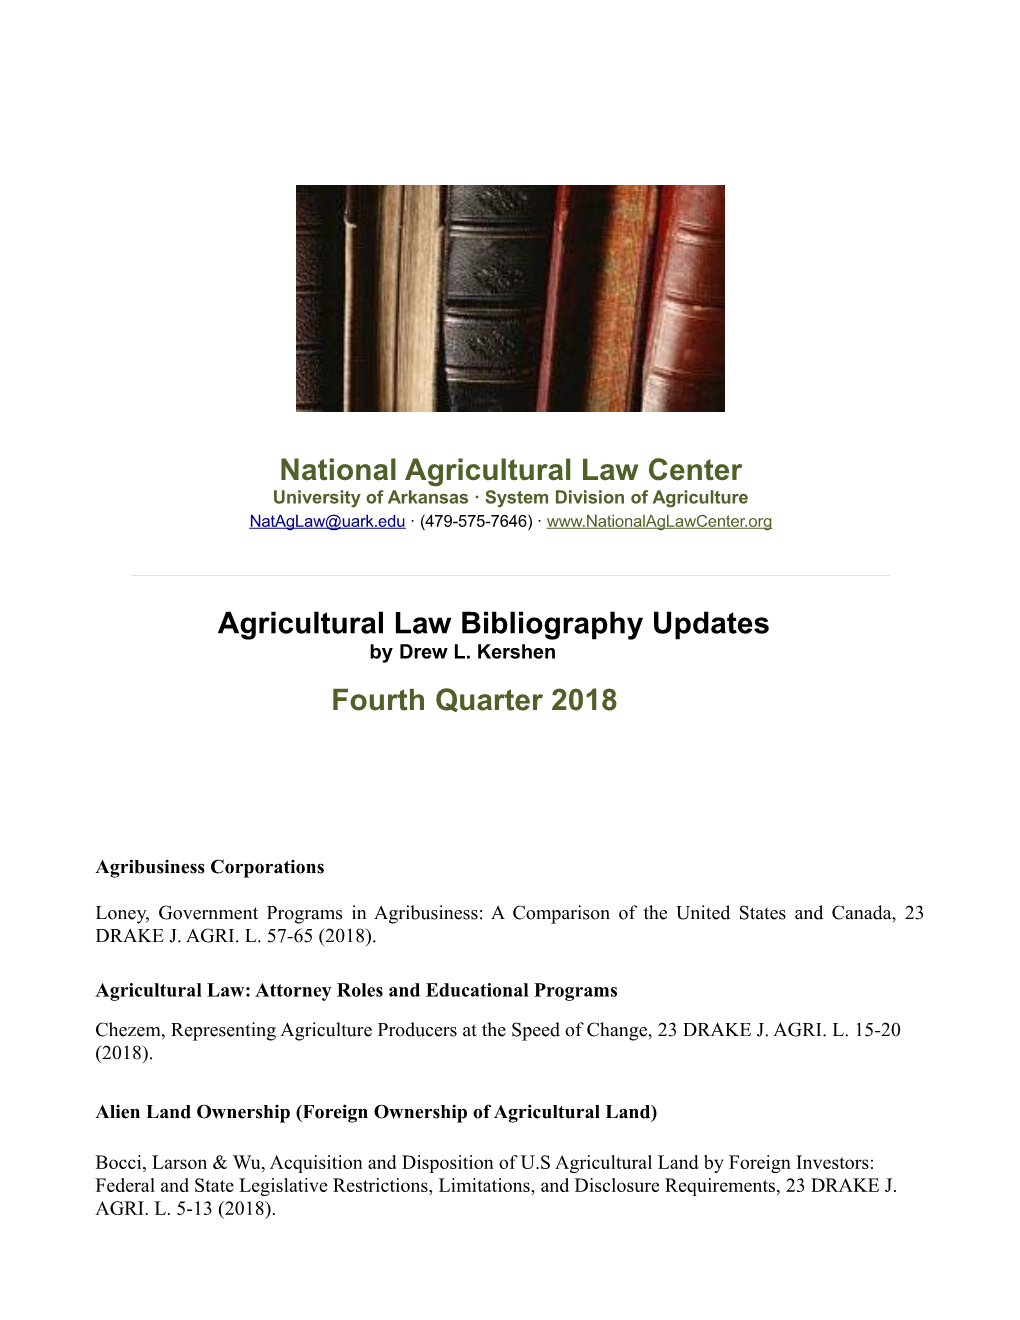 National Agricultural Law Center Agricultural Law Bibliography